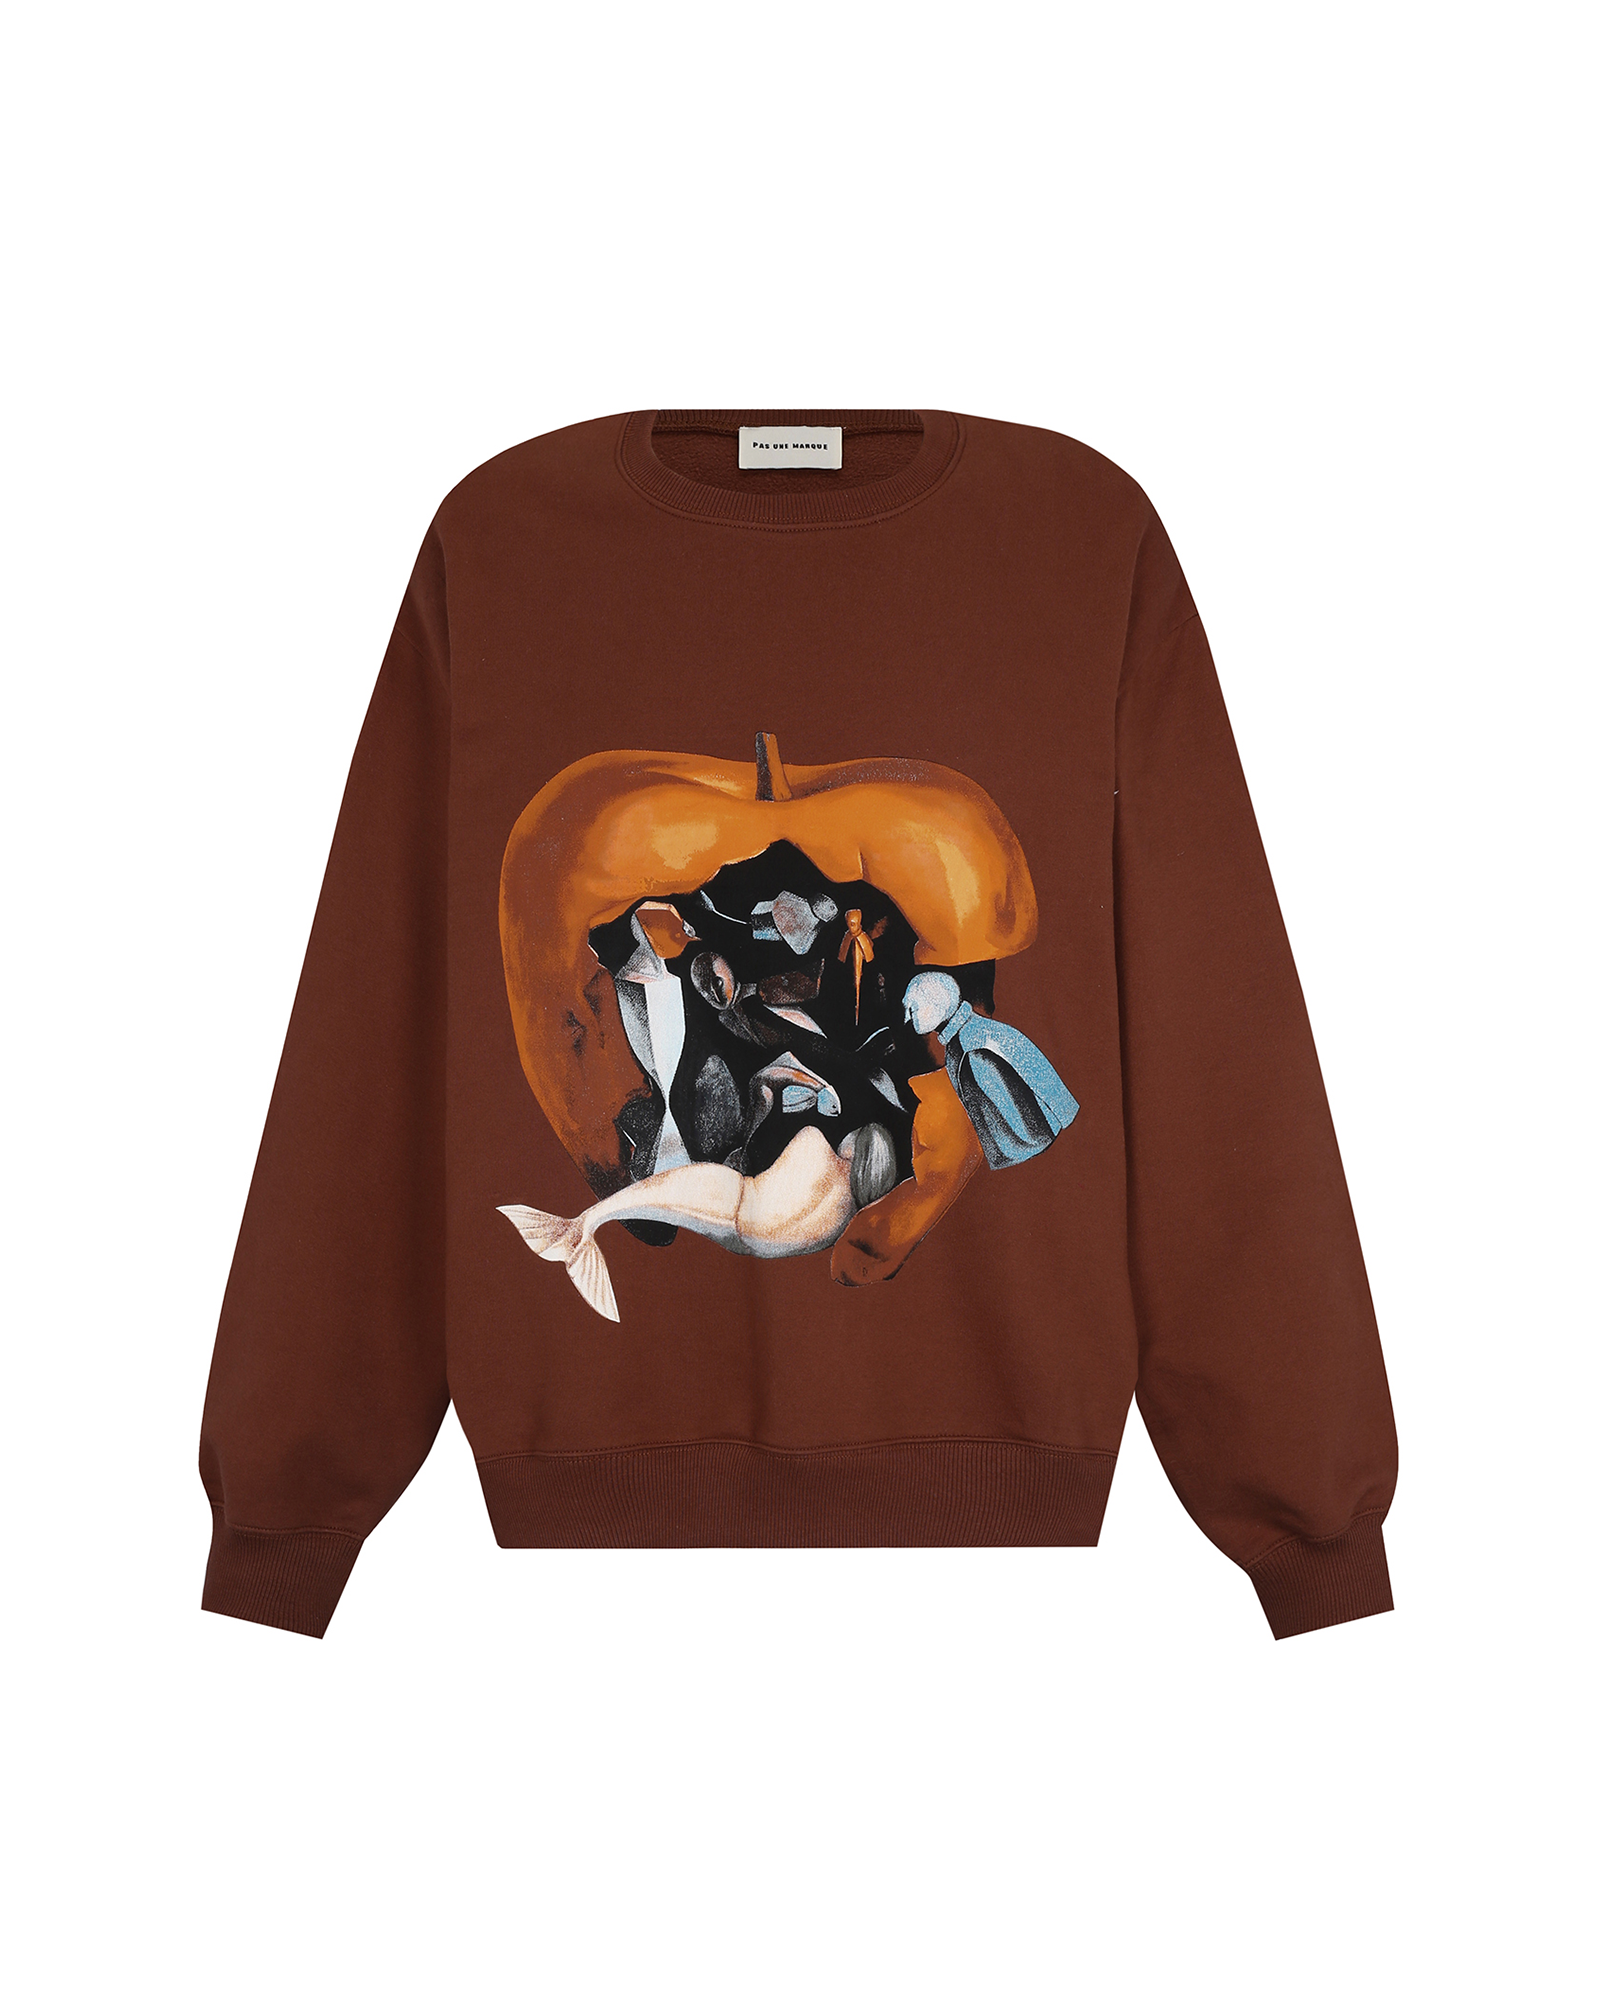 The Whisper of Time Sweatshirt (Cocoa Brown)